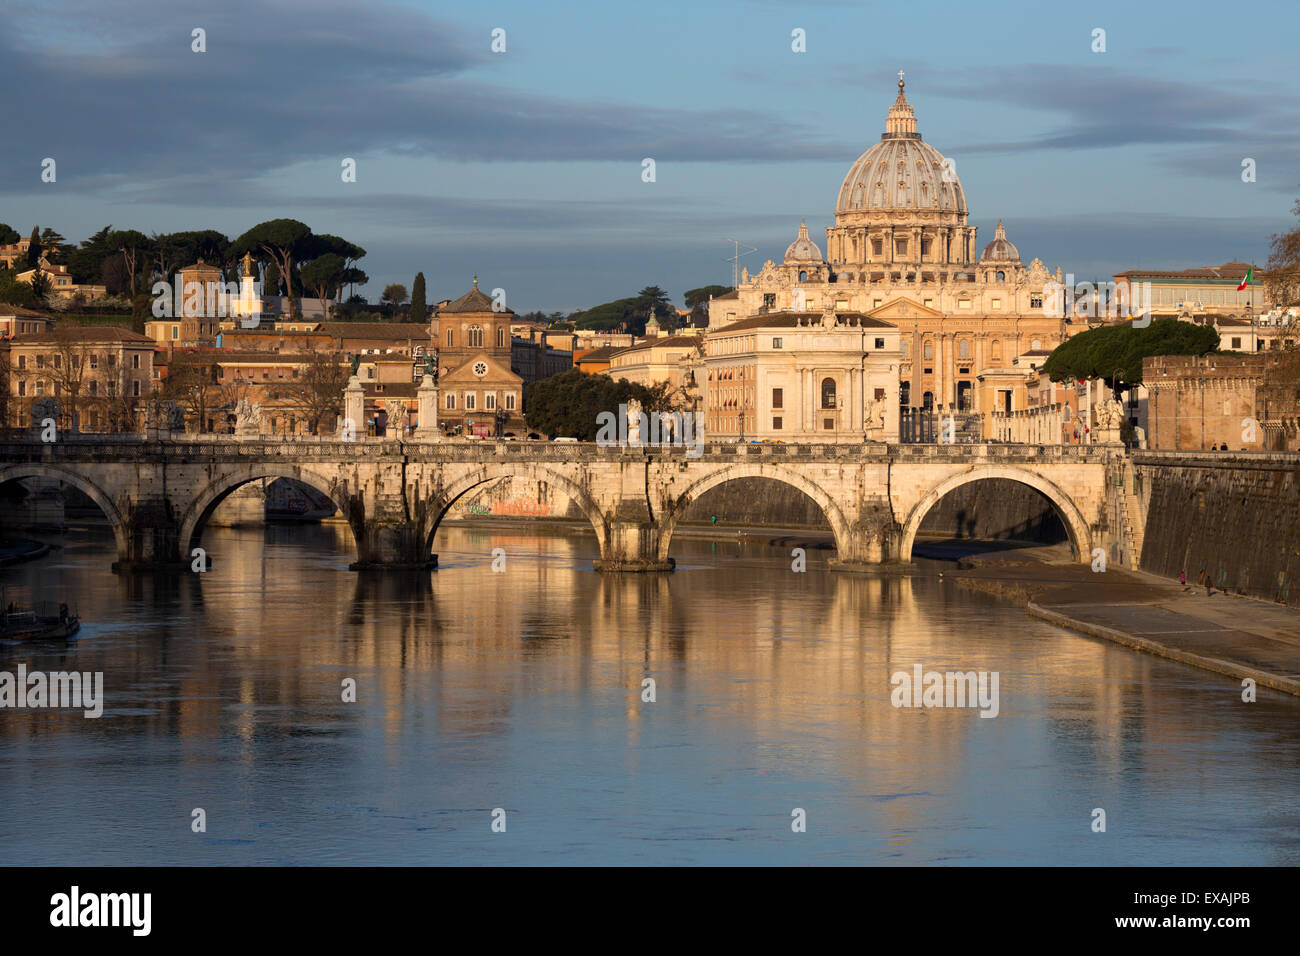 St. Peter's Basilica, the River Tiber and Ponte Sant'Angelo, Rome, Lazio, Italy, Europe Stock Photo